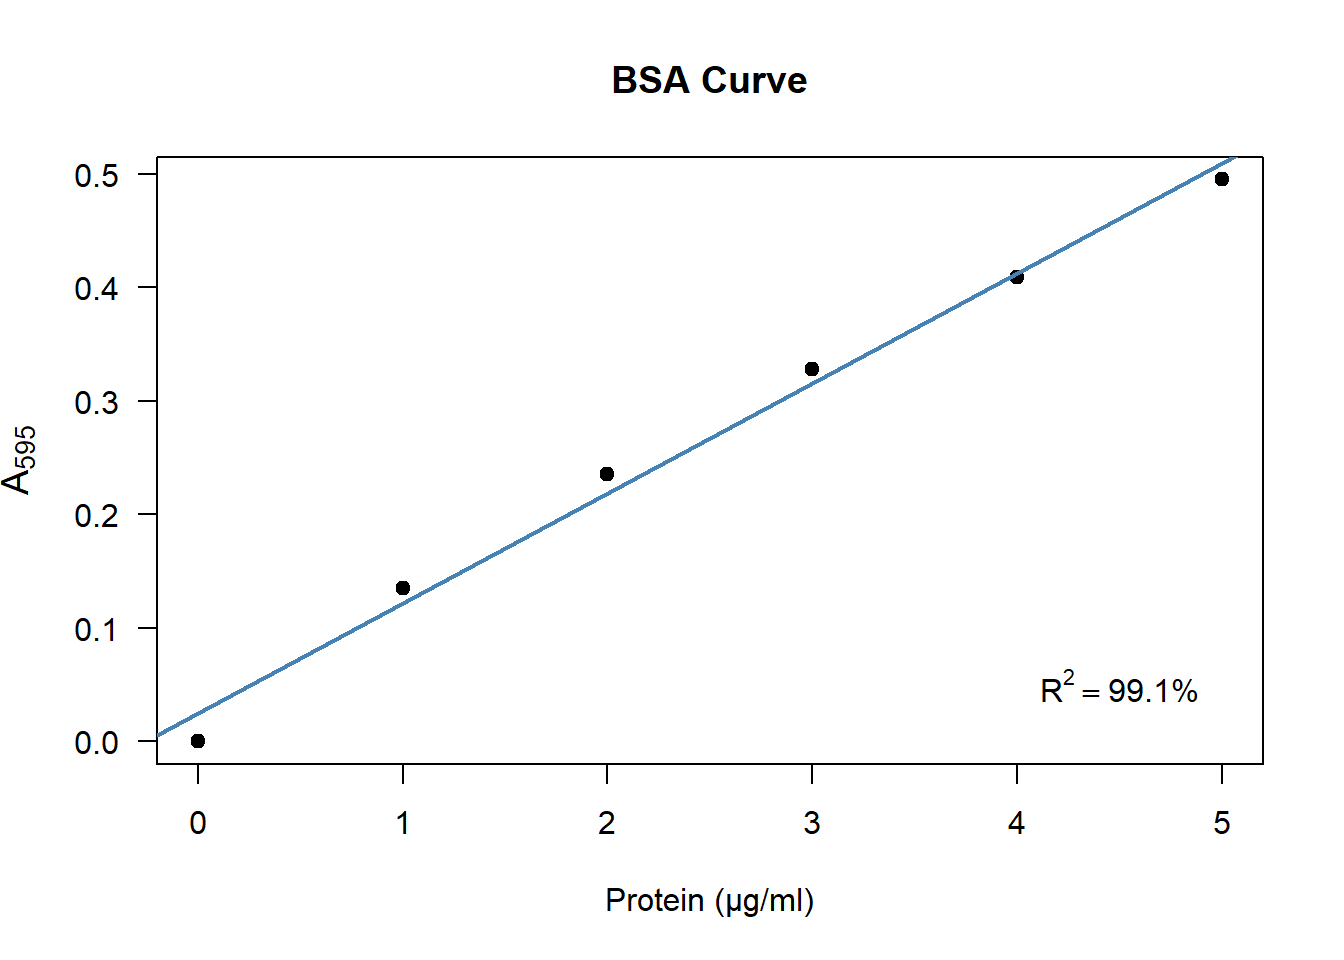 A typical BSA curve, constructed from the data in table \@ref(tab:ExampleBSA).